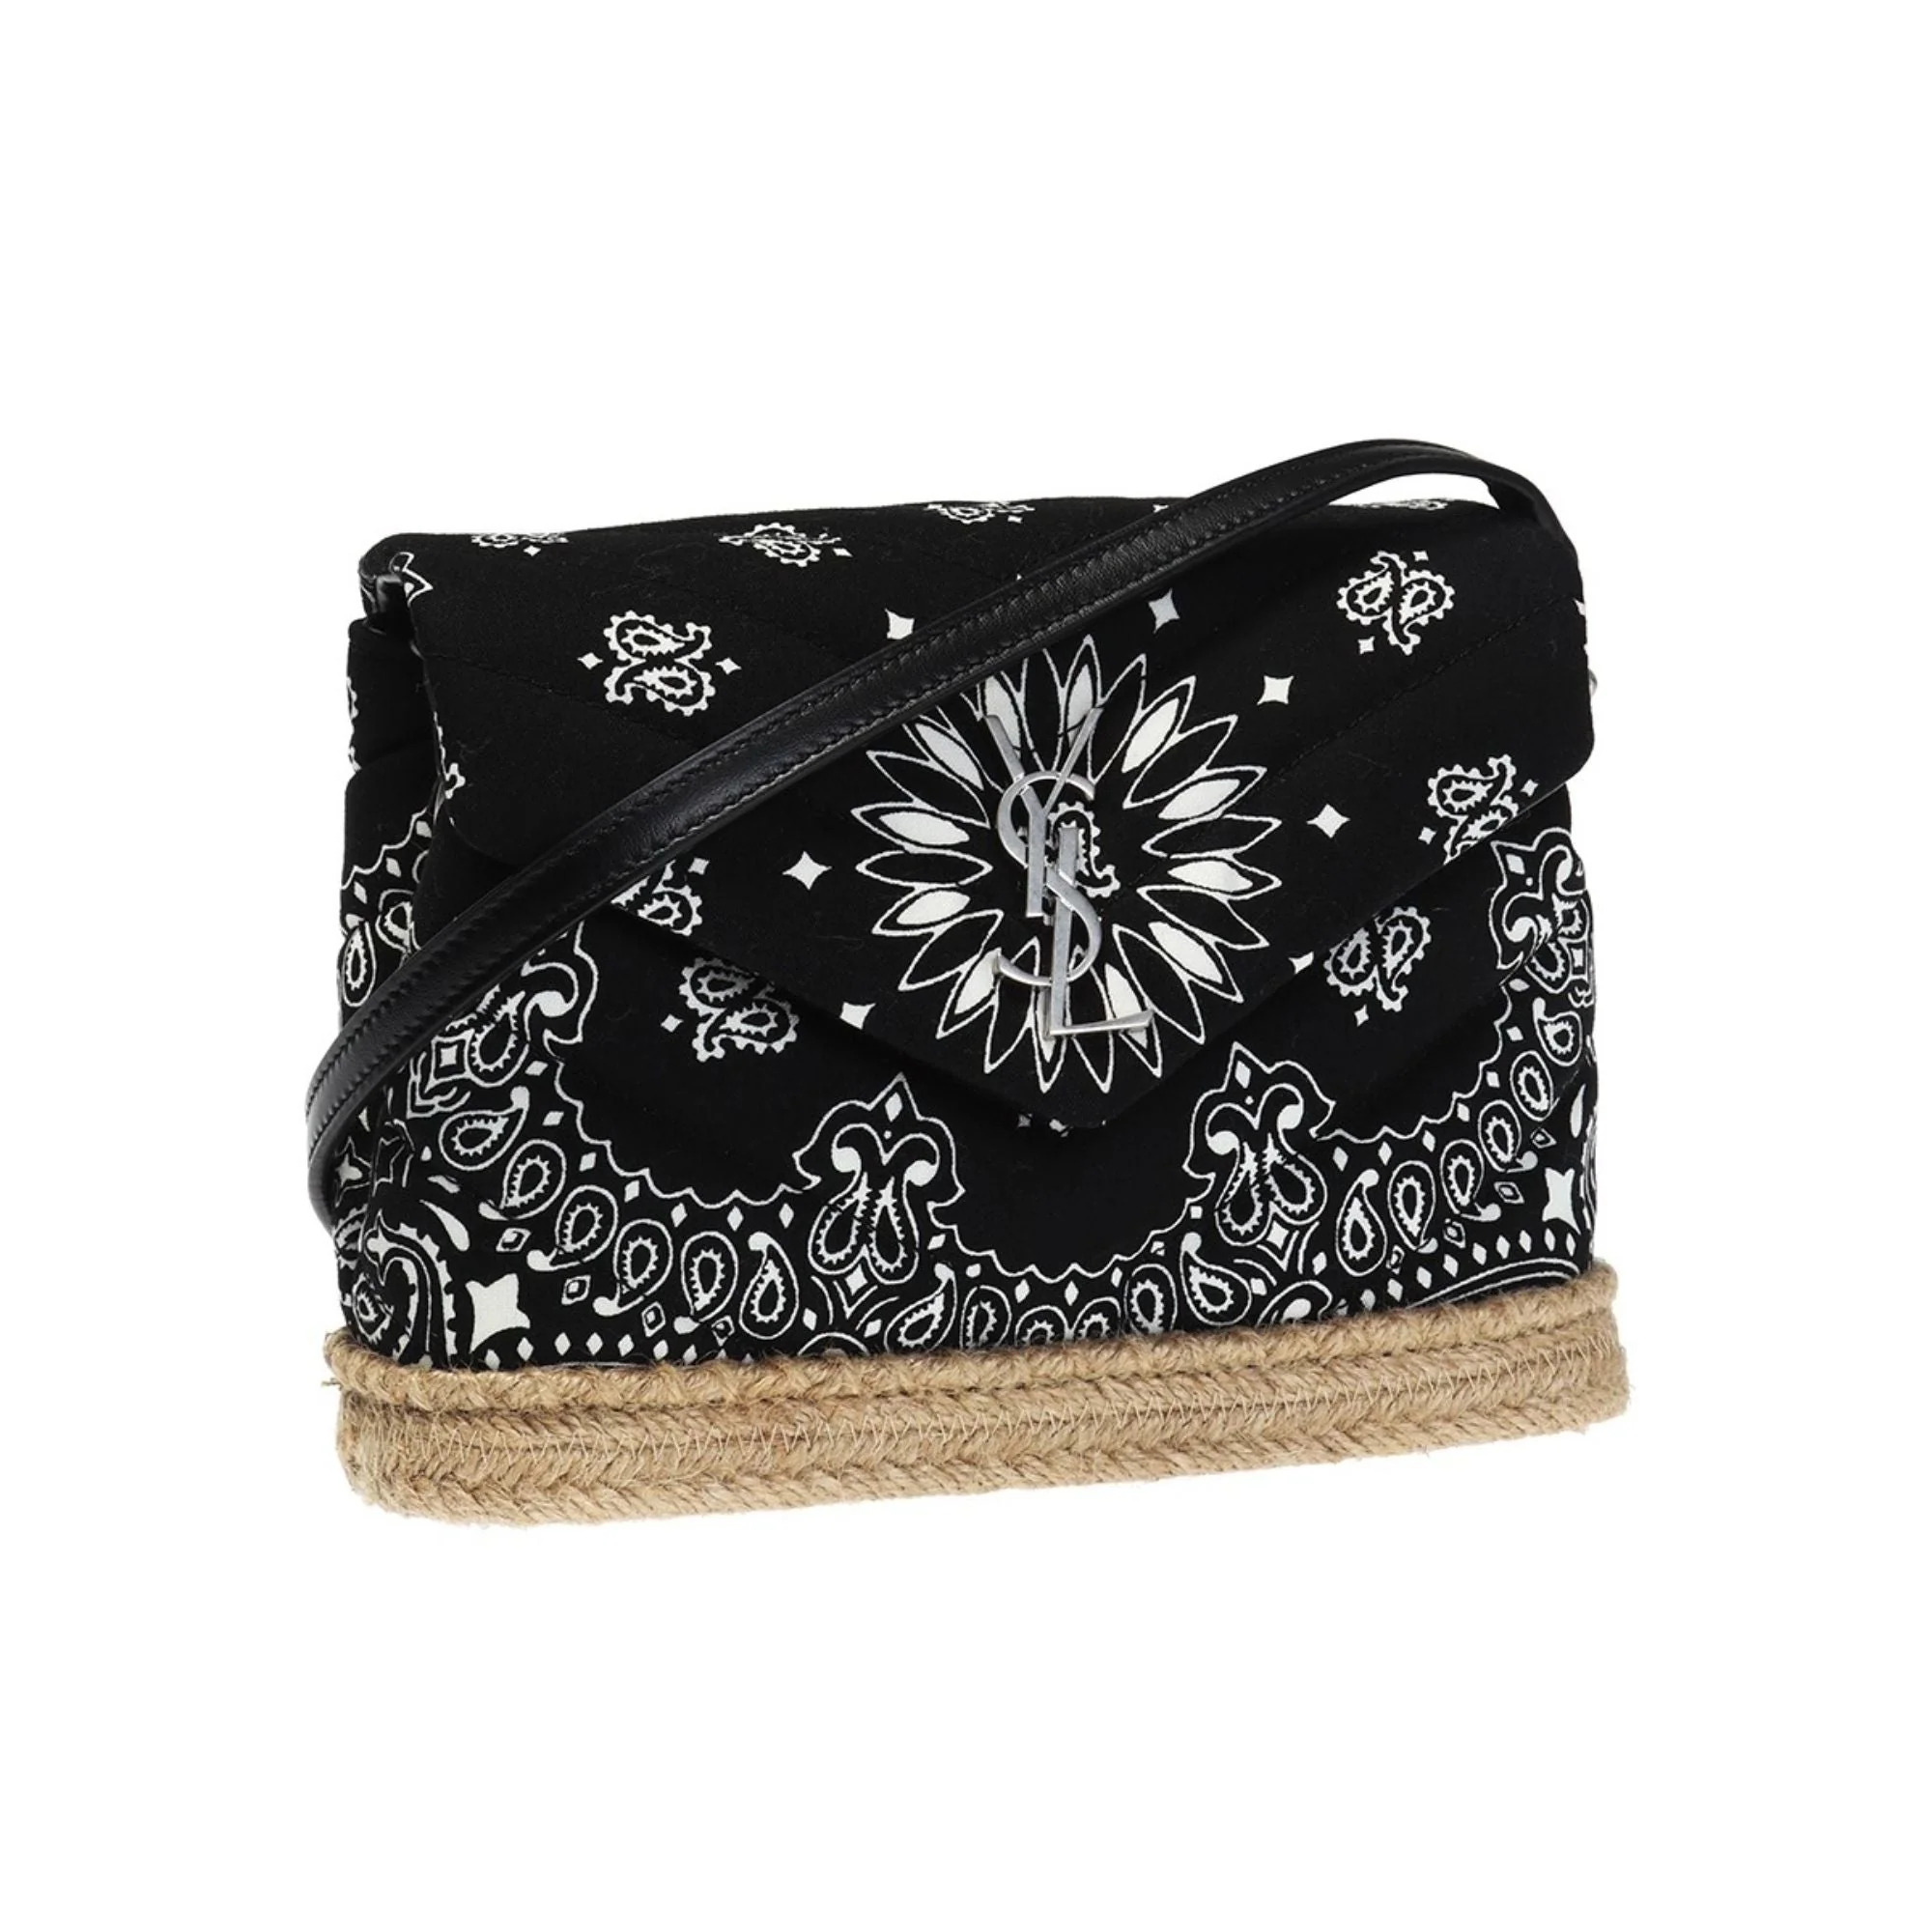 Saint Laurent Loulou Black Paisley Quilted Small Cross Body Bag 531045 - image 2 of 8